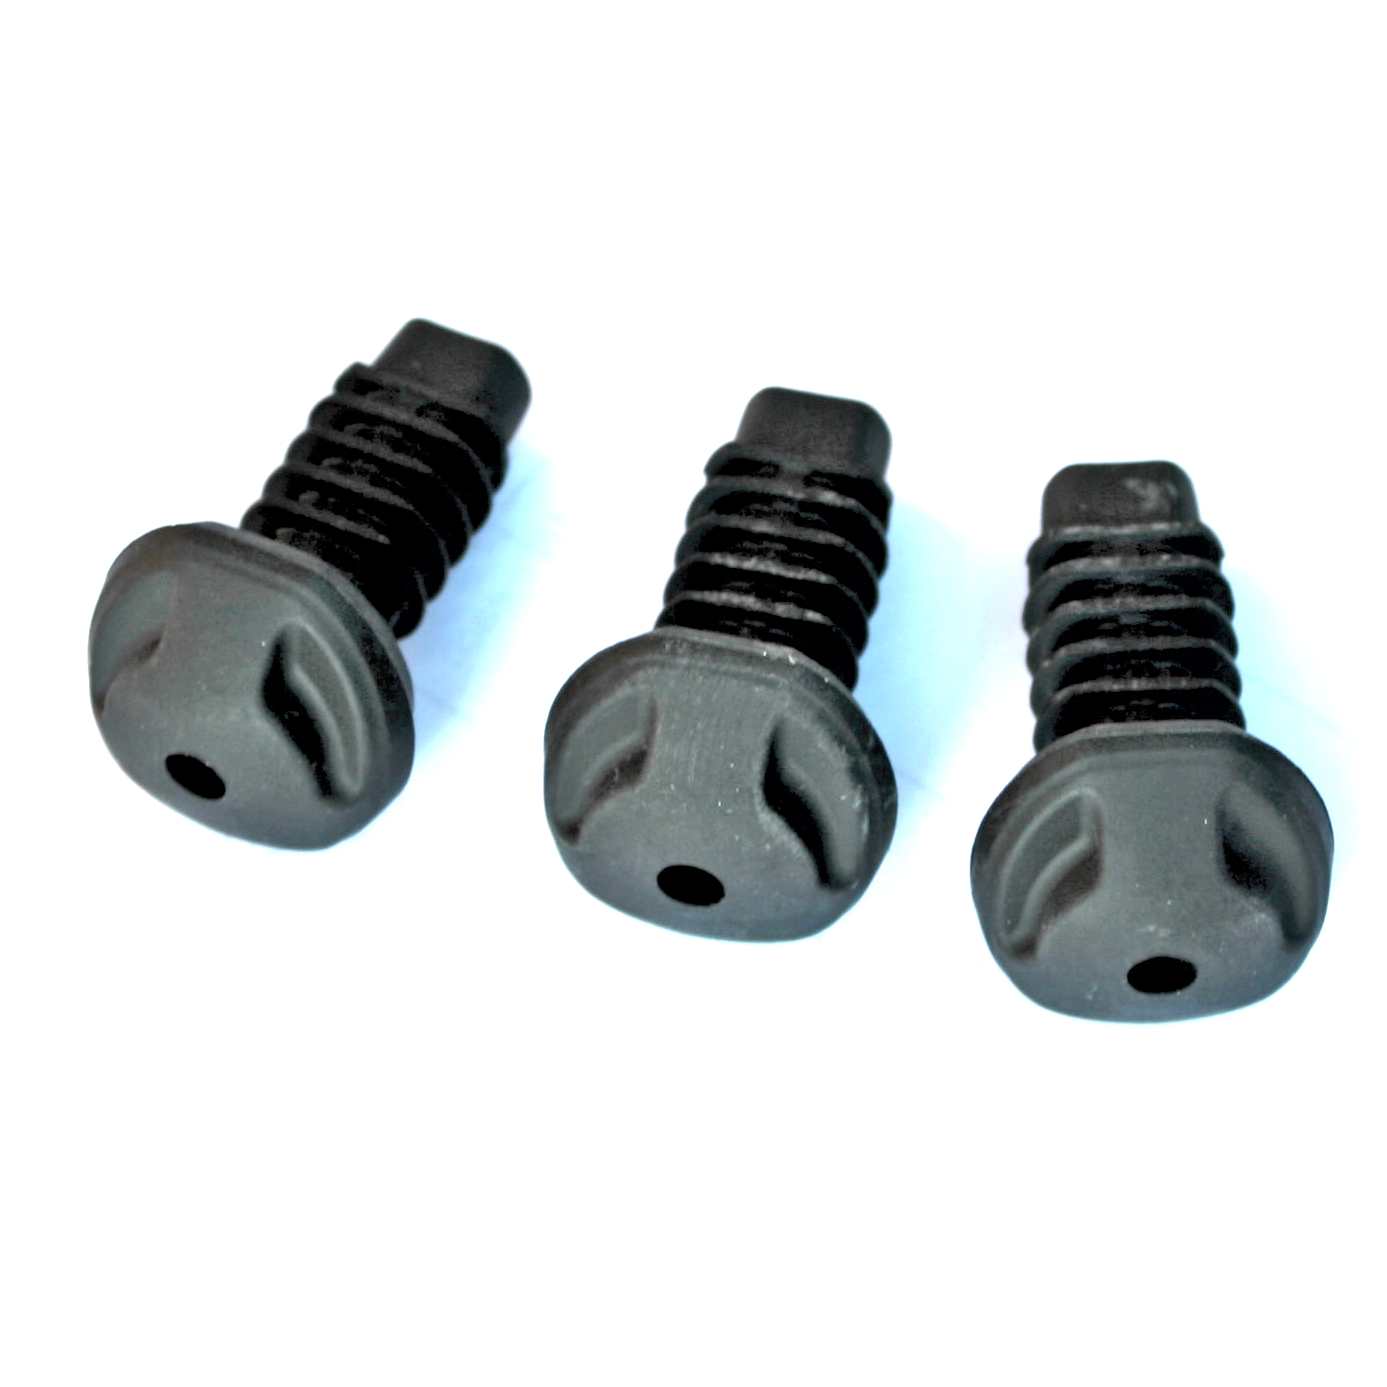 Manfrotto R1039231 Set of Feet for MT190XPRO4